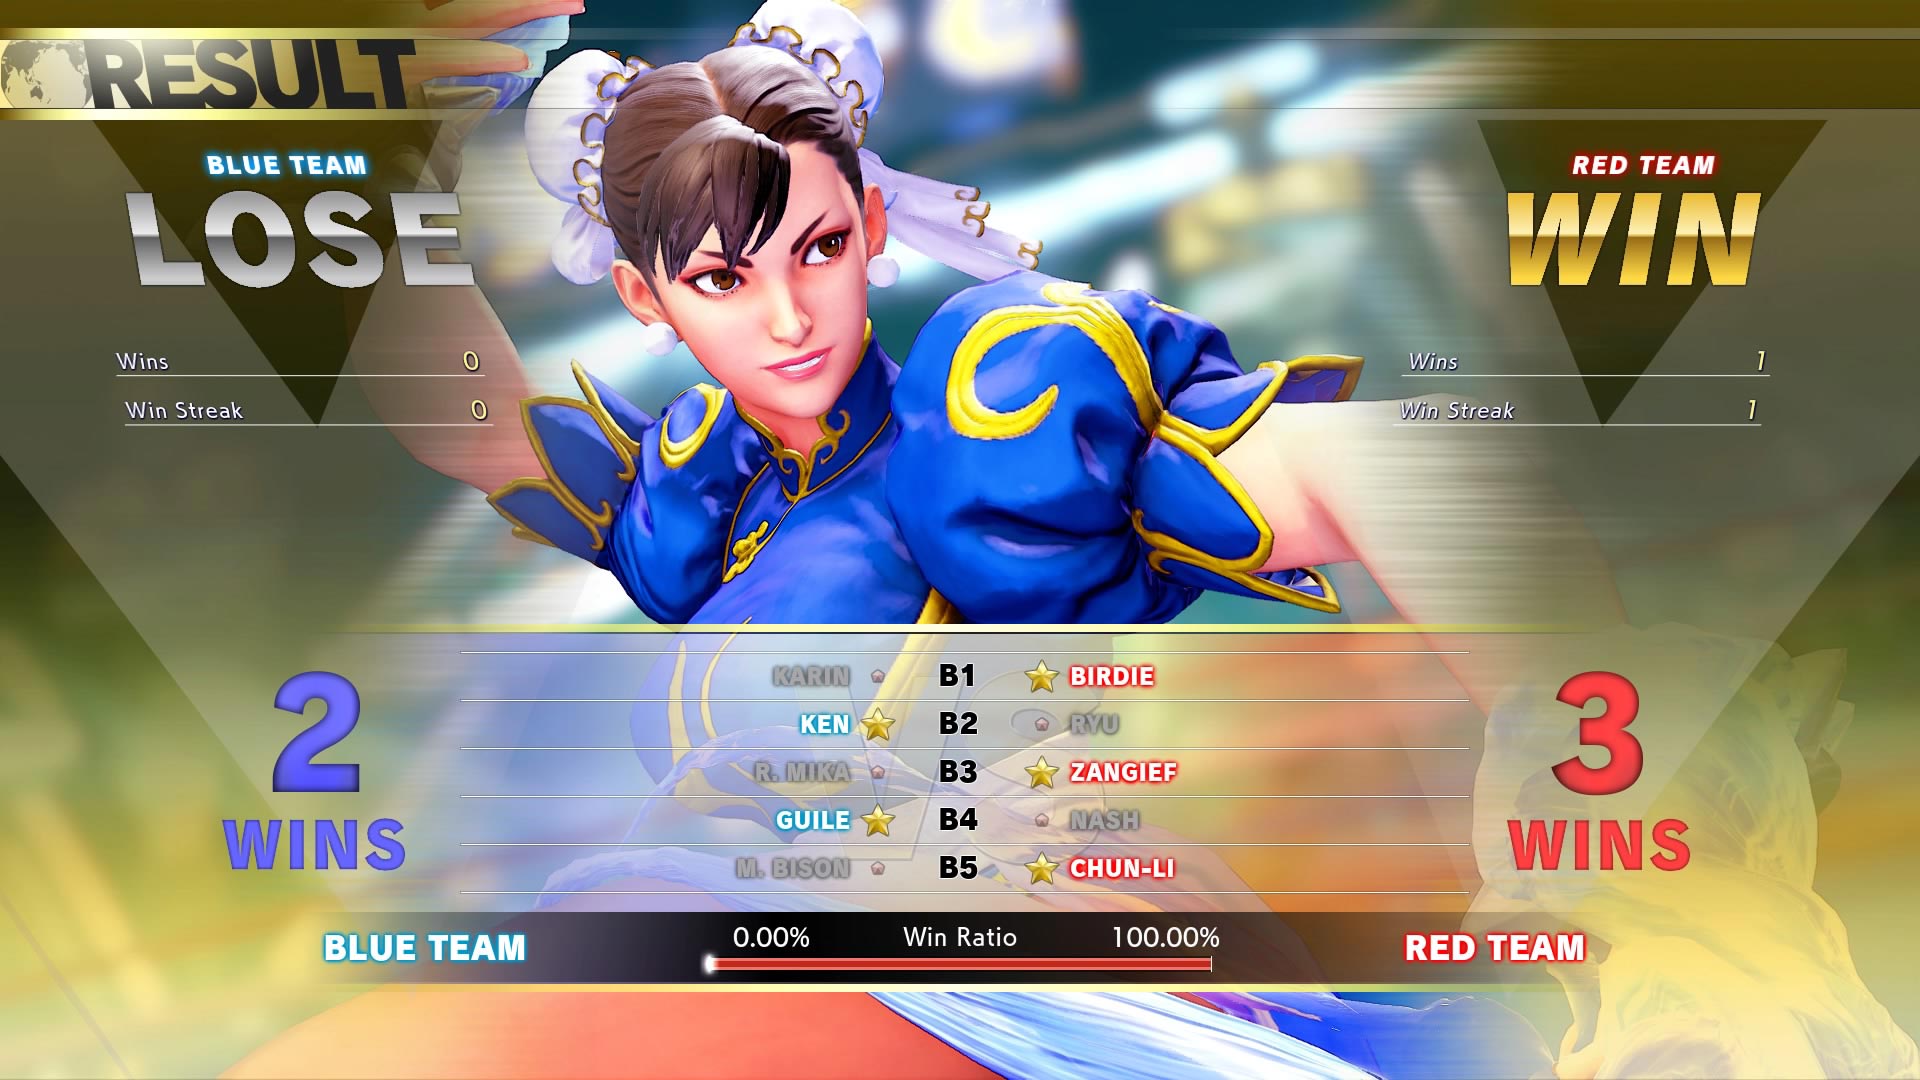 Image for Years on, Street Fighter 5 finally gets a proper arcade release